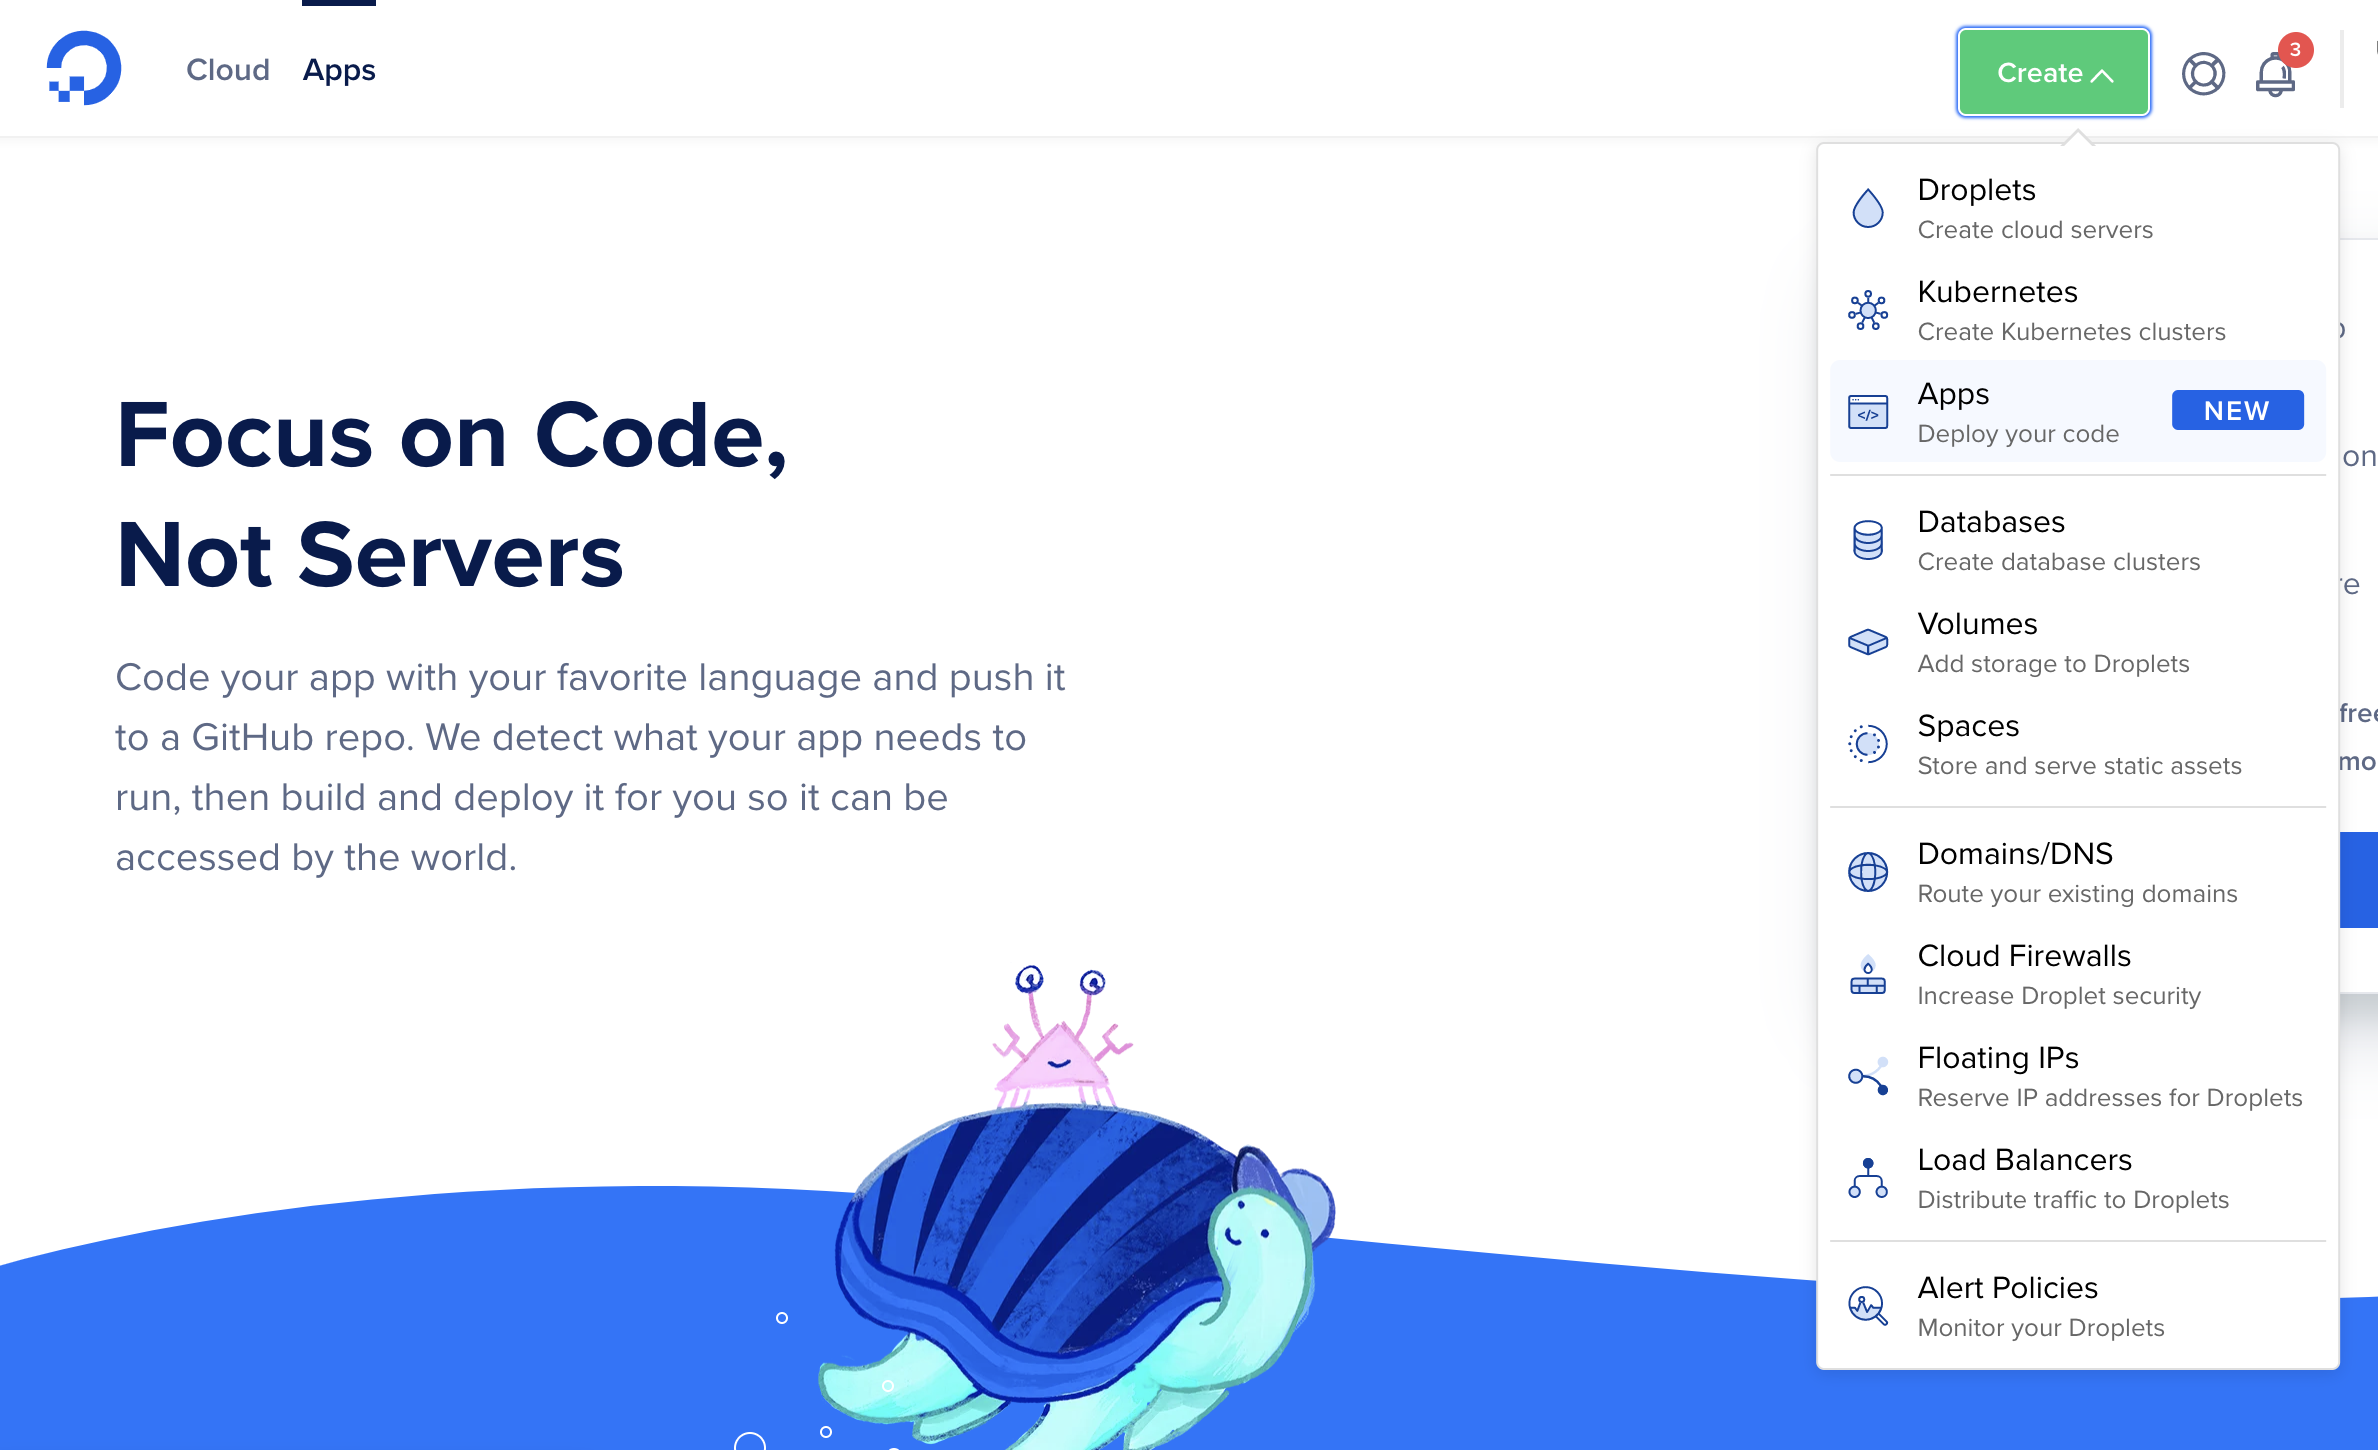 Create a new app page in the DigitalOcean interface